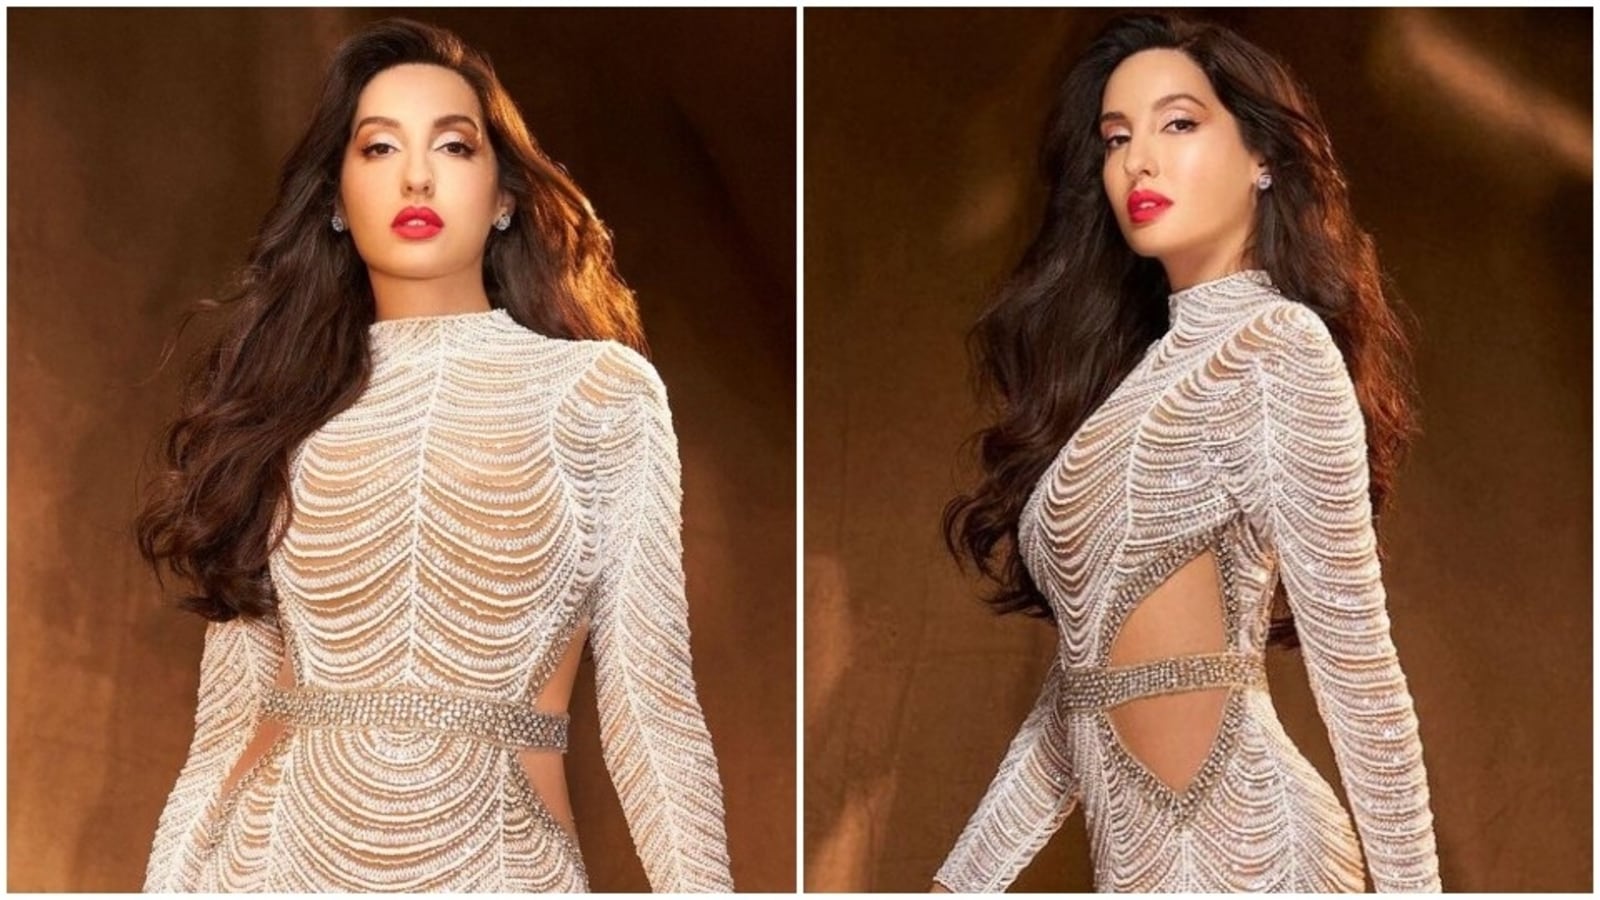 Nora Fatehi Nudes - Nora Fatehi cuts sultry silhouette in shimmering gown worth â‚¹2 lakh: See  pics | Fashion Trends - Hindustan Times